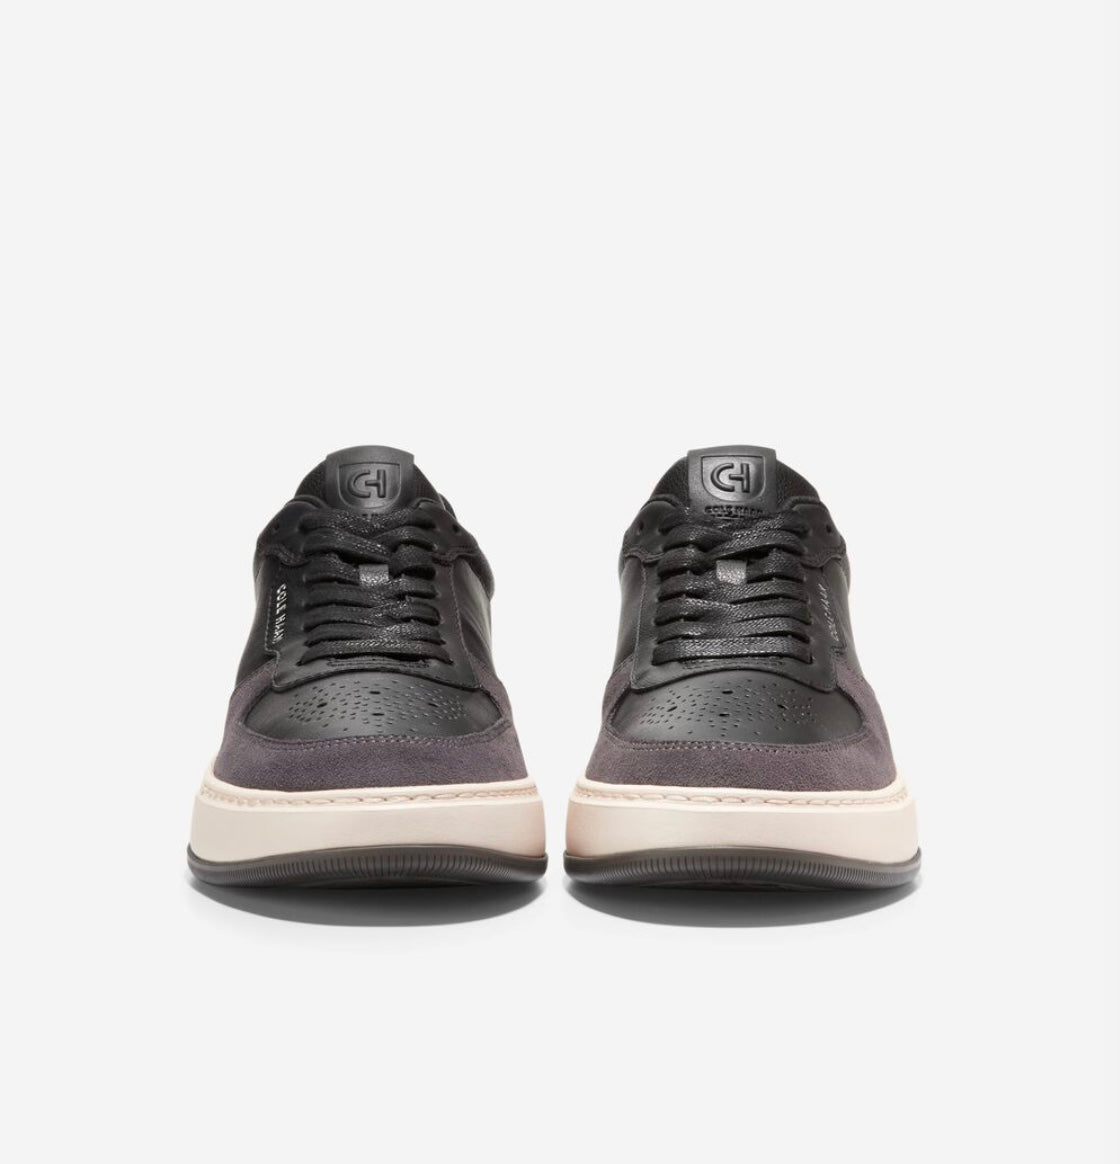 Cole Haan GrandPro Crossover sneakers - Black Pavement